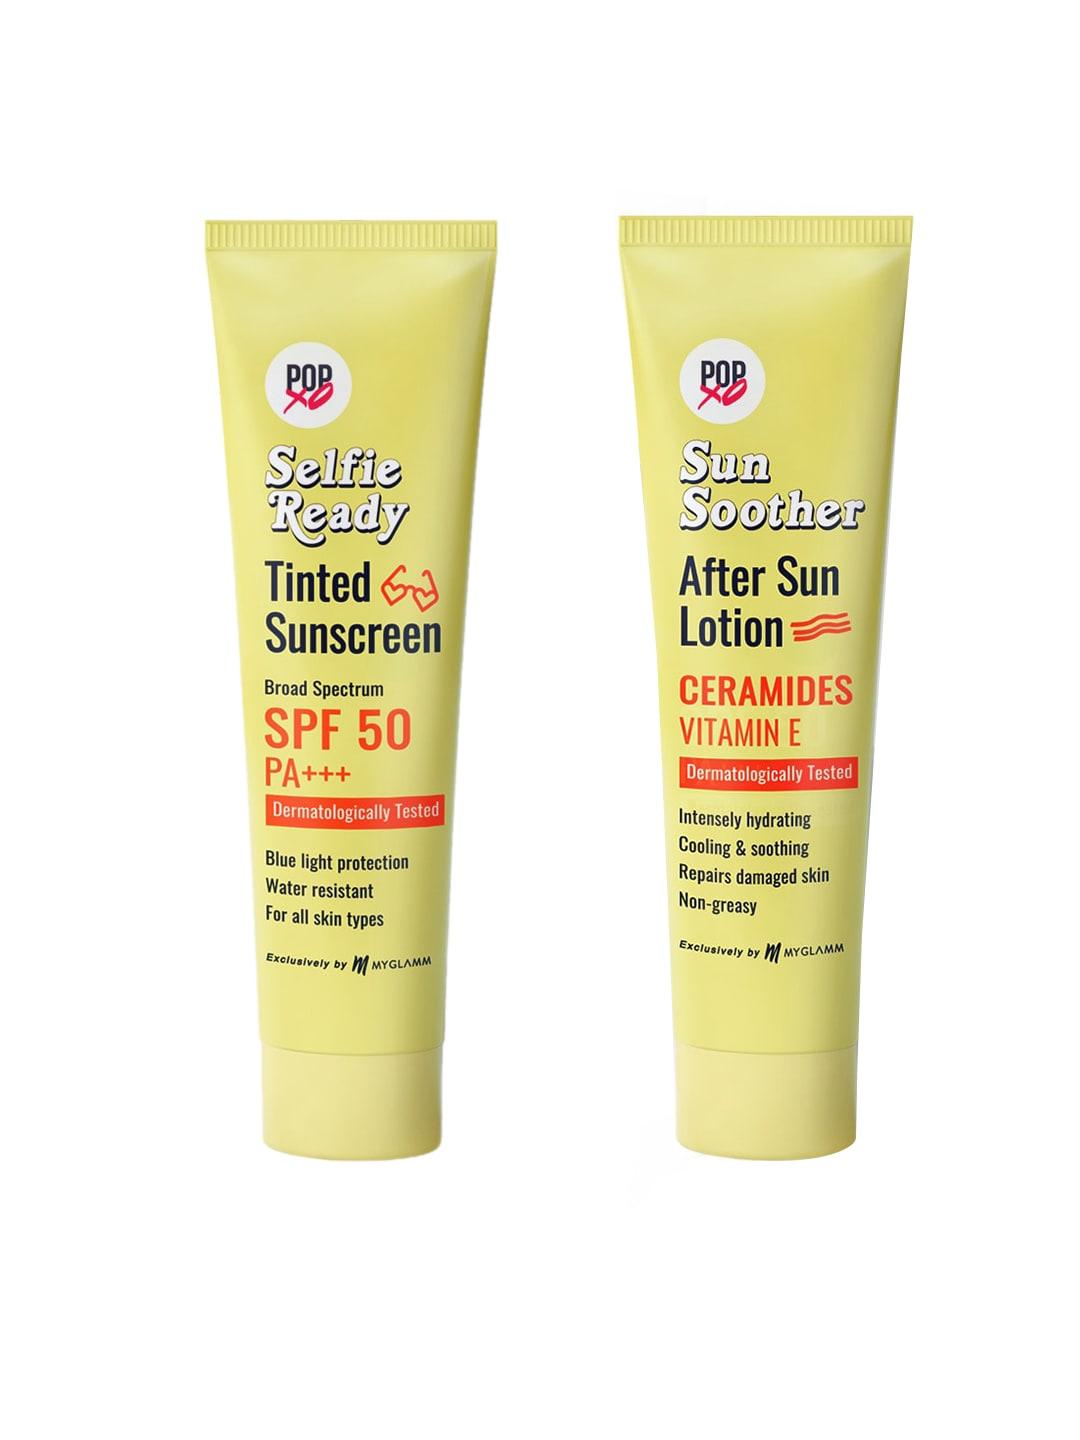 MyGlamm POPxo Sun Soother After Sun Lotion & Selfie-Ready Tinted Sunscreen Set - 30g each